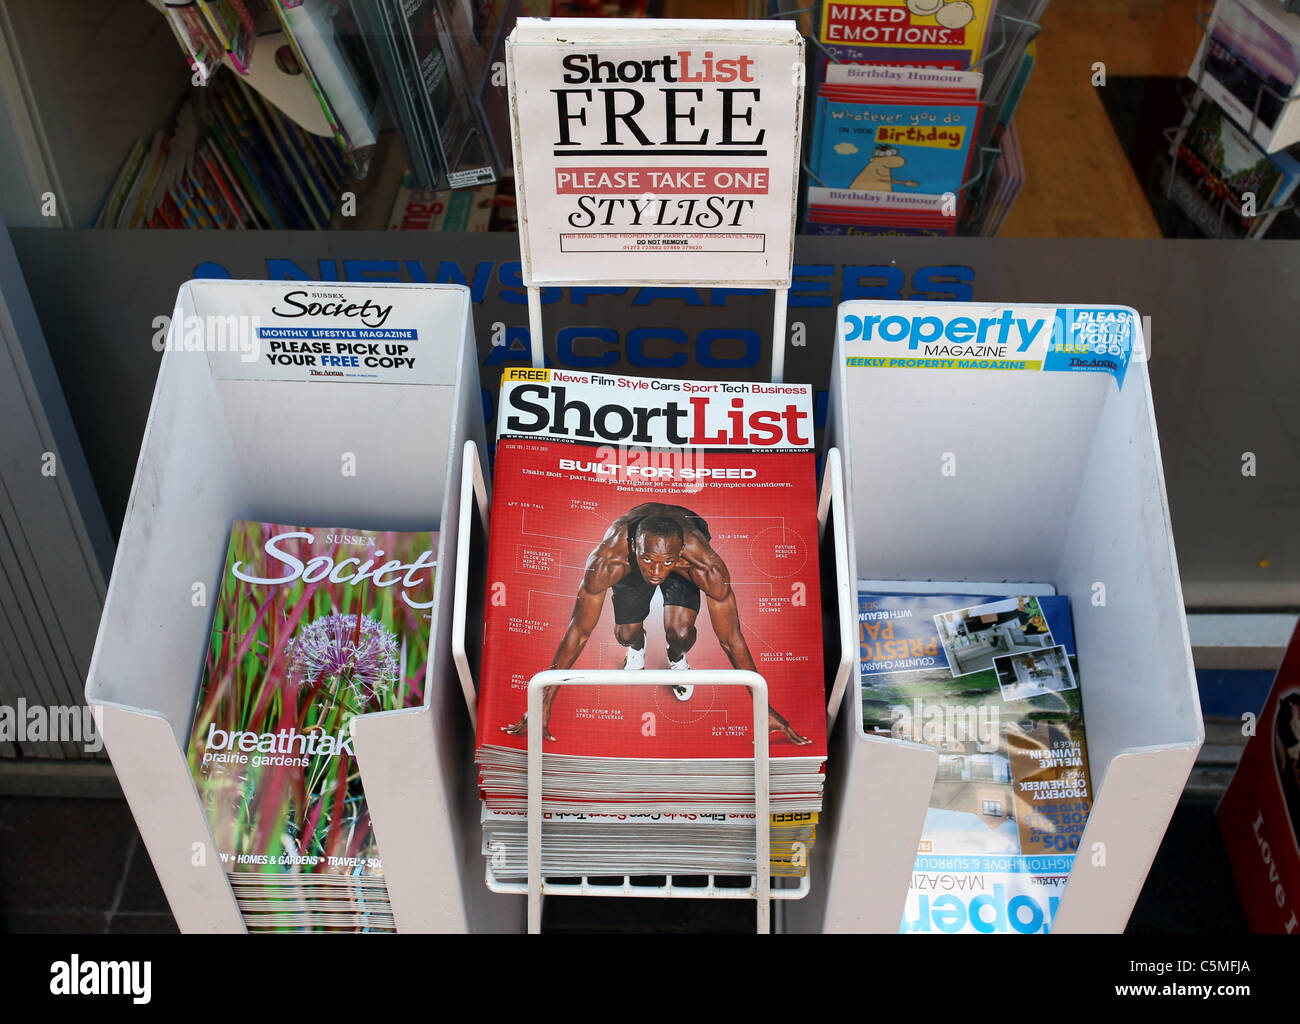 Stacks of free sheets and magazines in display bins outside a shop in Brighton, East Sussex, UK. Stock Photo